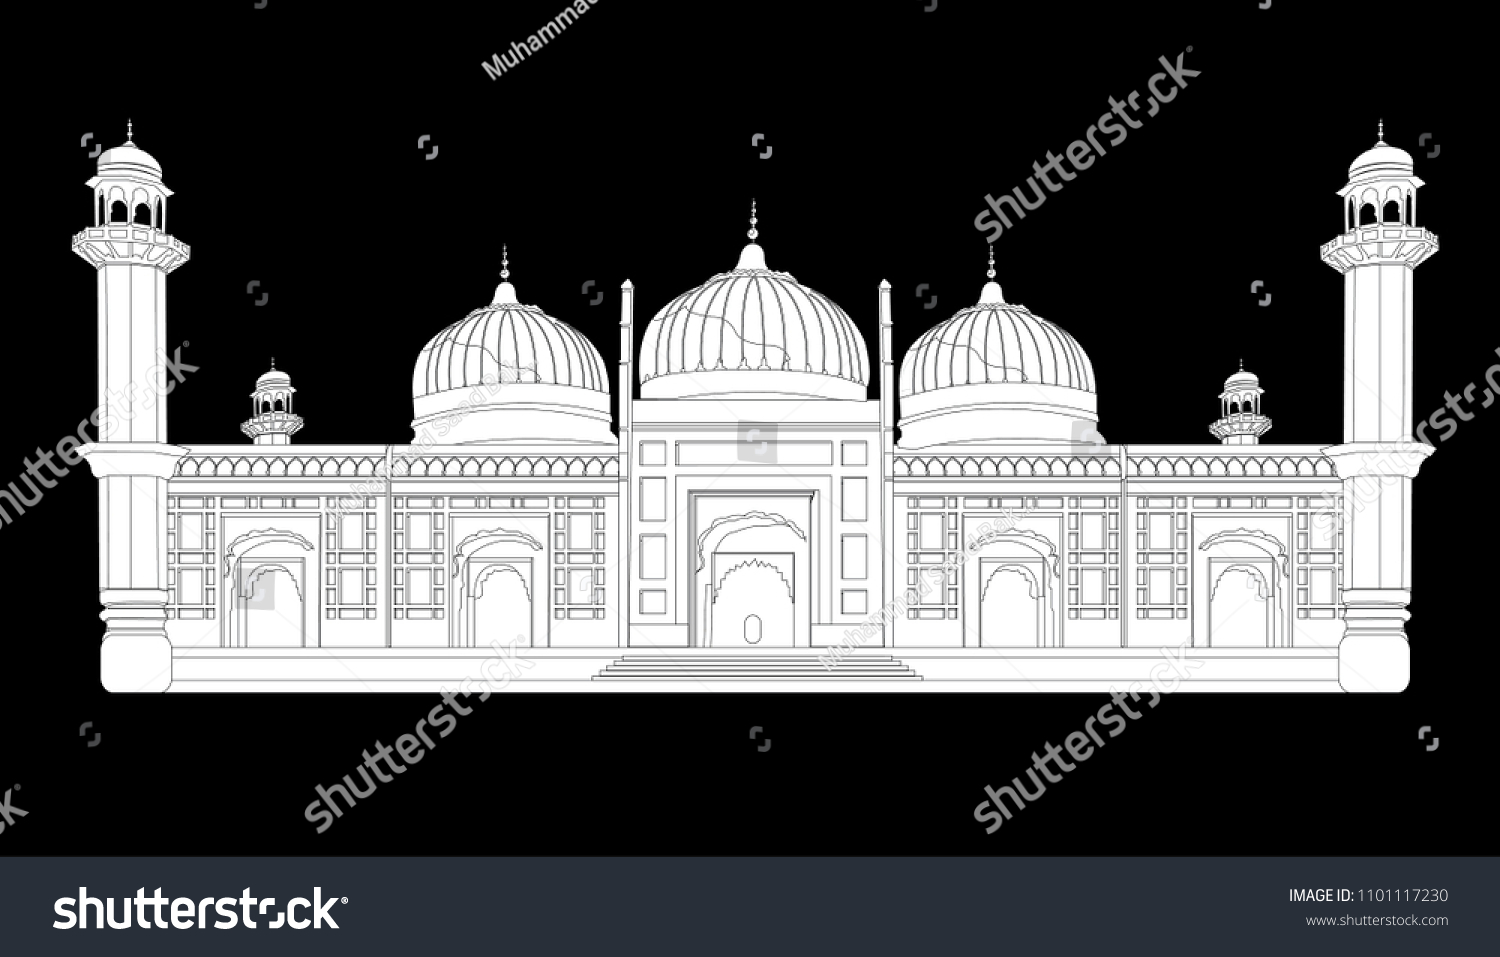 SVG of Detailed vector / illustration of Derawar Mosque Situated in Bahawalpur Pakistan svg